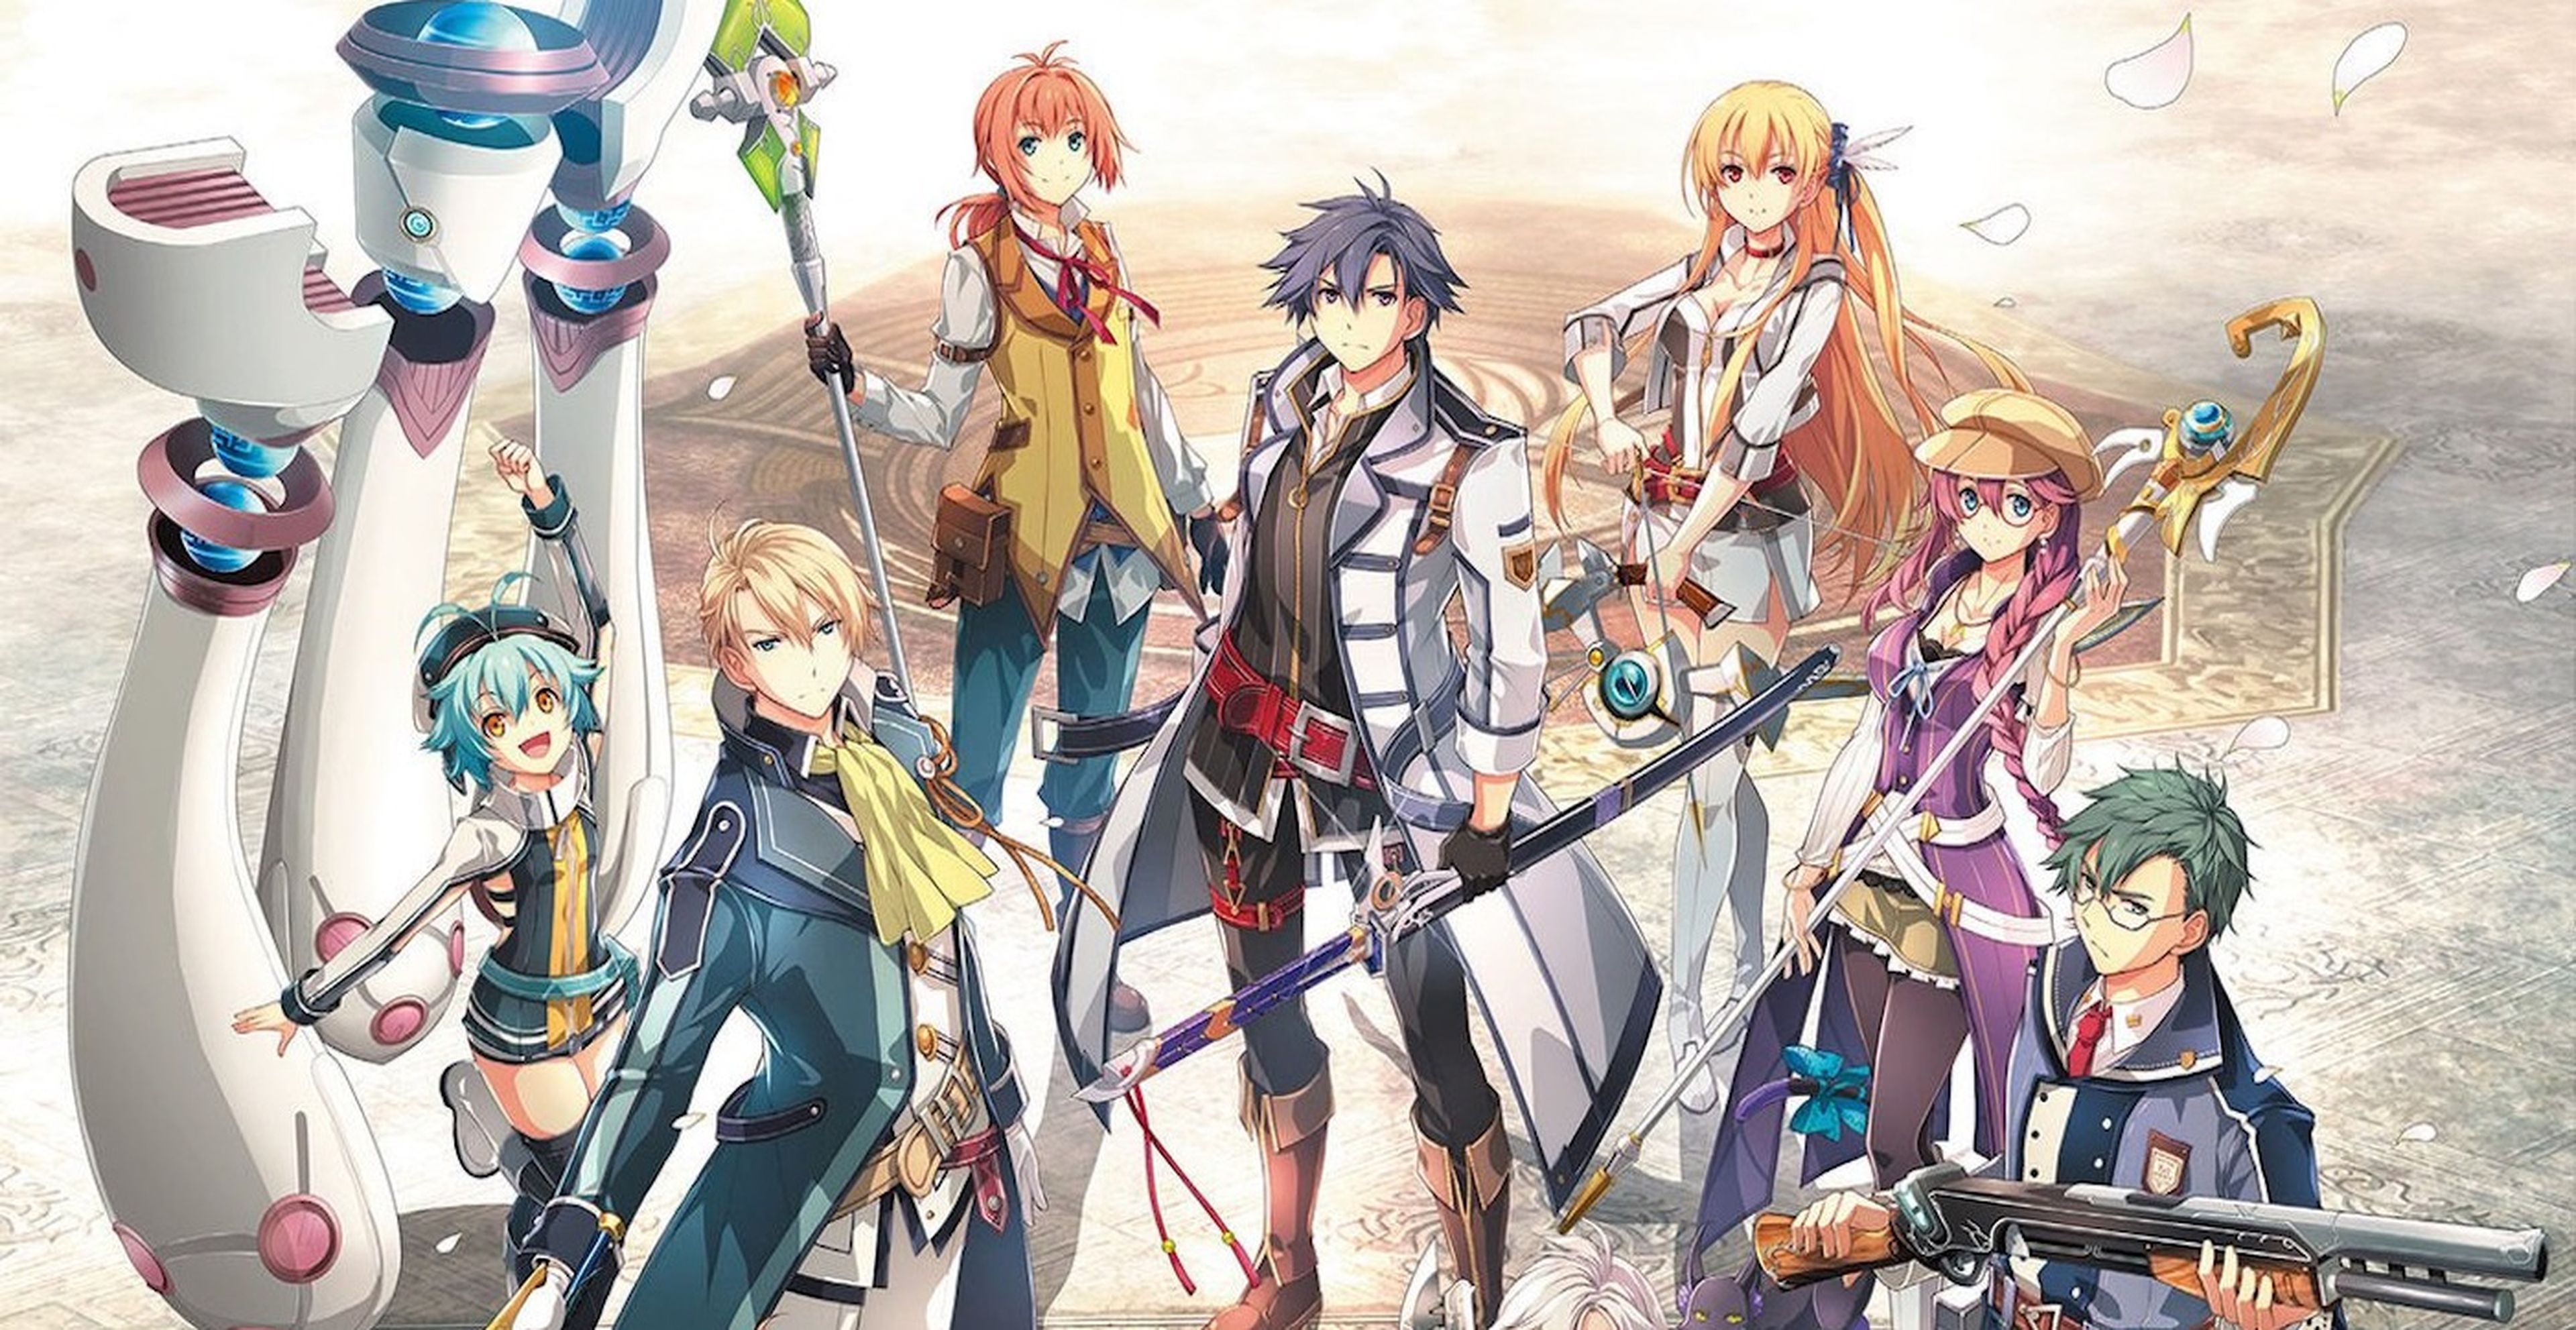 Trails of Cold Steel III análisis